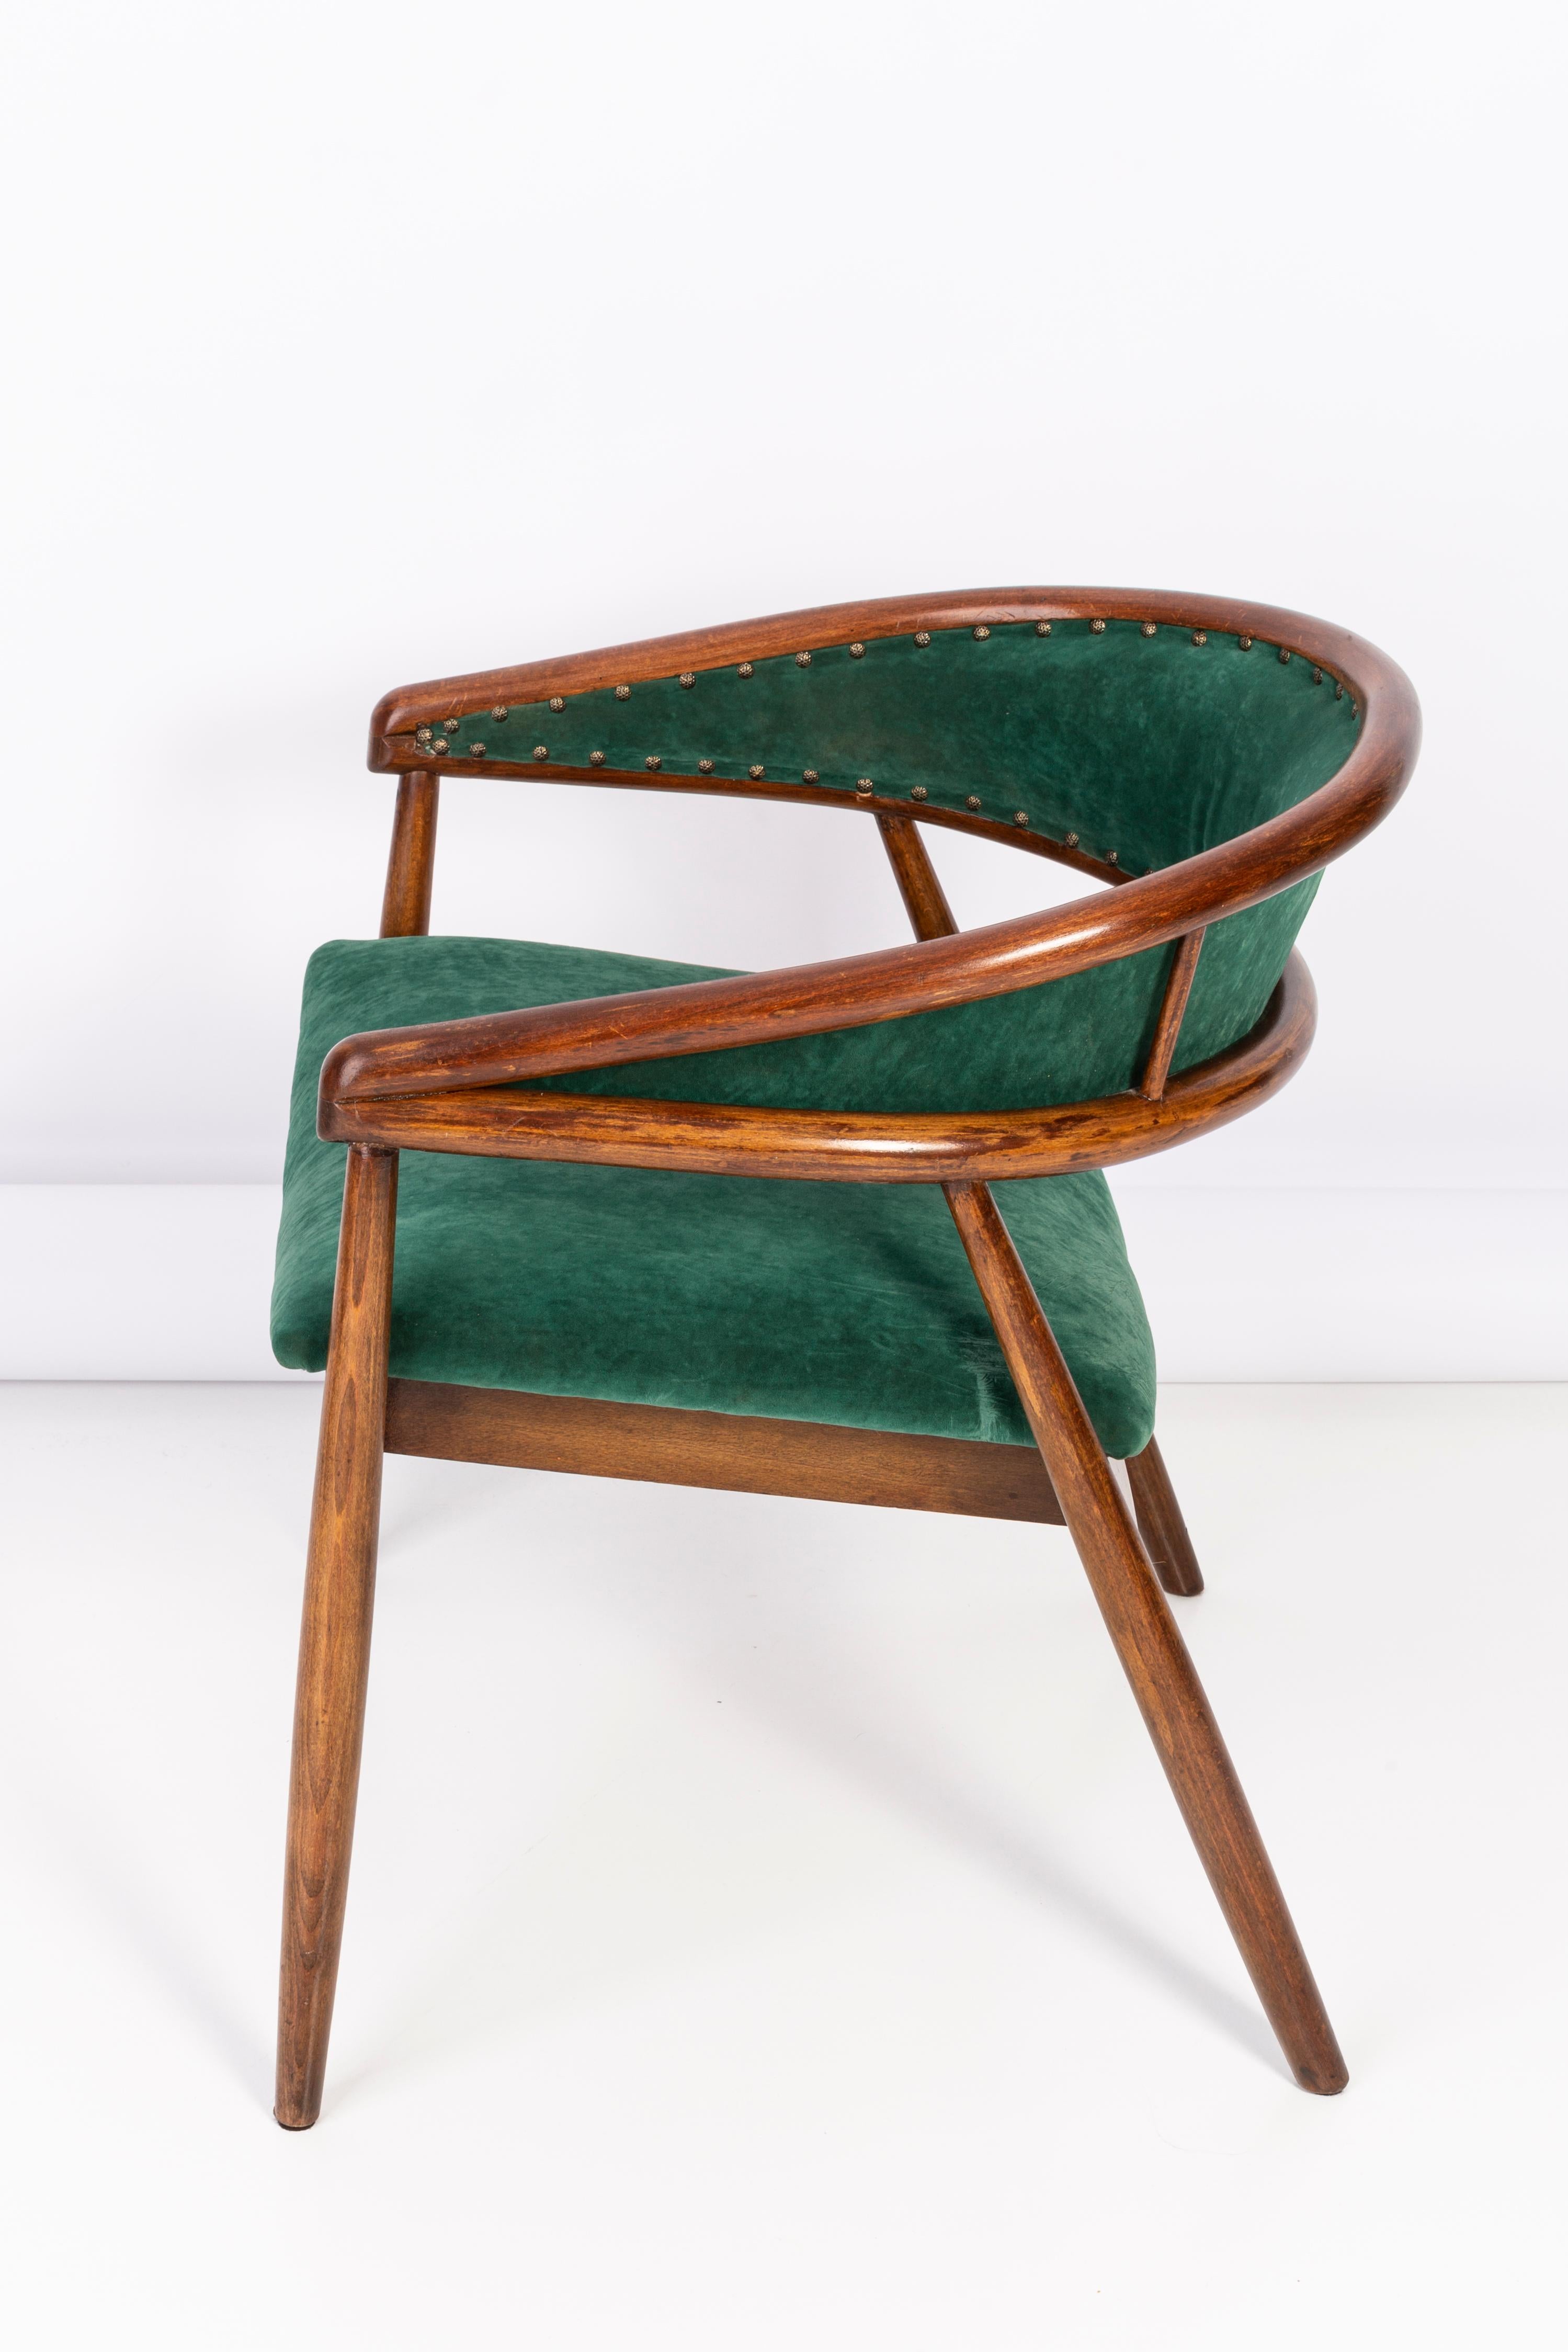 Set of Two James Mont Bent Beech Armchairs, Dark Green, B-3300 Type, 1960s For Sale 3